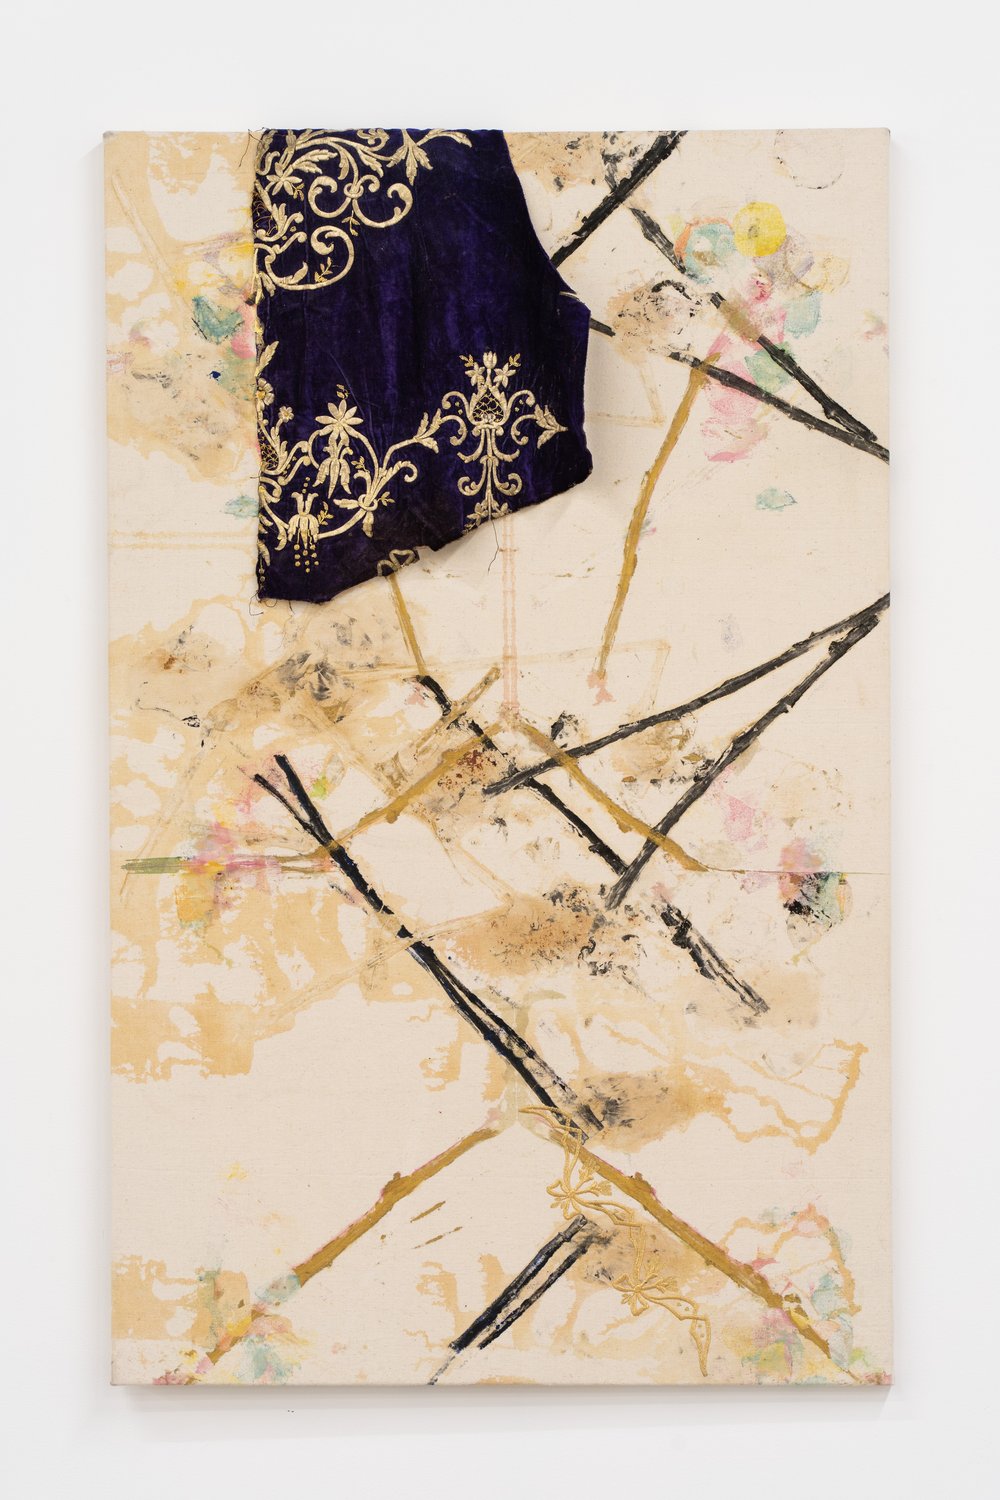  Chrysanne Stathacos,  Rose Ottoman I , 2017. Printed roses, embroidery, and antique velvet on linen, 48 x 30 inches. Courtesy of the artist and The Breeder, Athens. Photo: Nando Alvarez-Perez. 